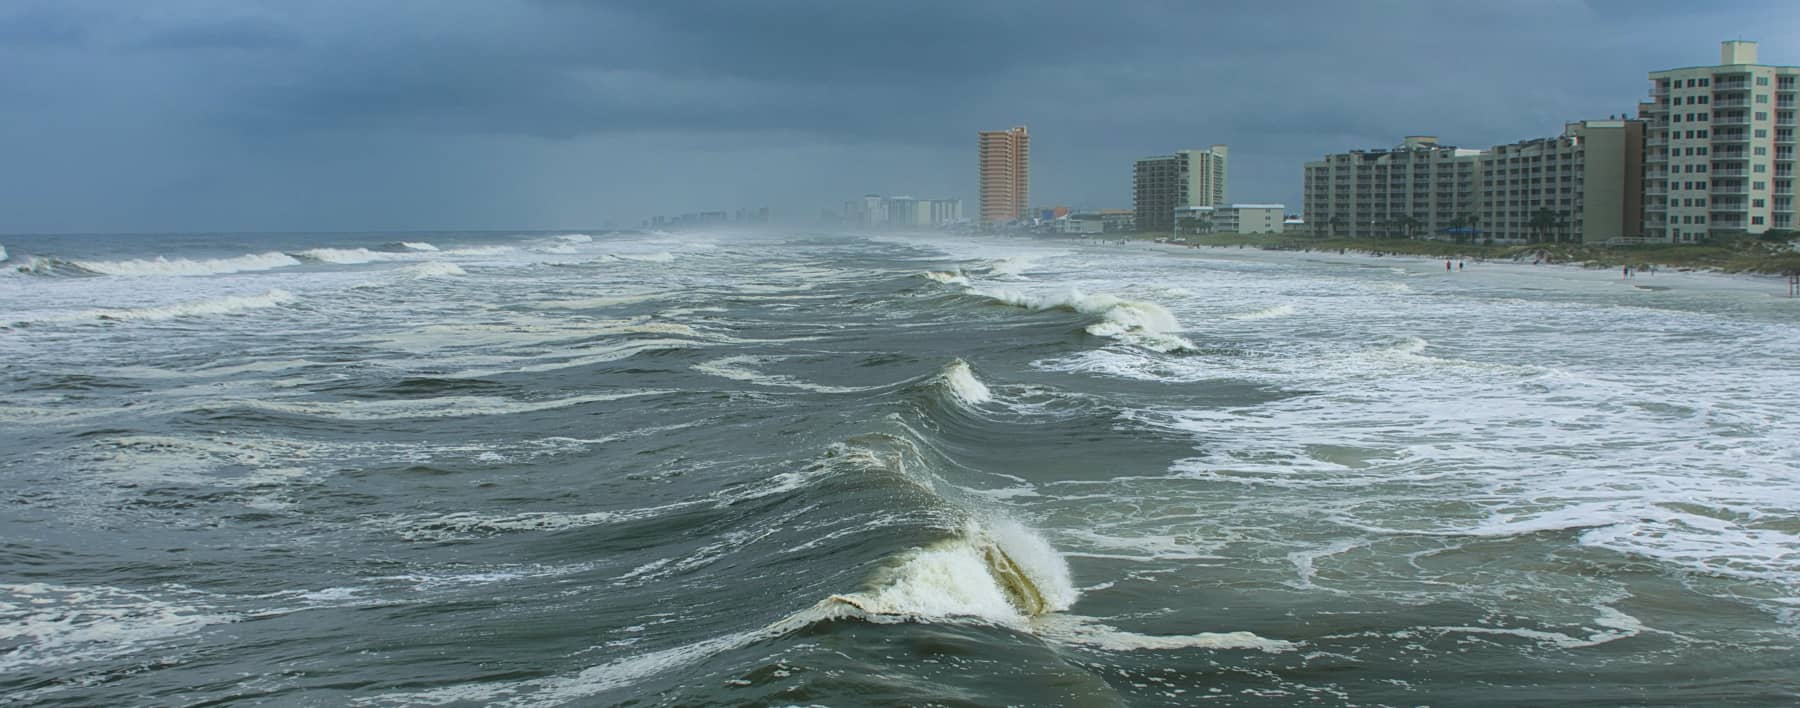 Is Your Property Hurricane Ready? | GLR, Inc.